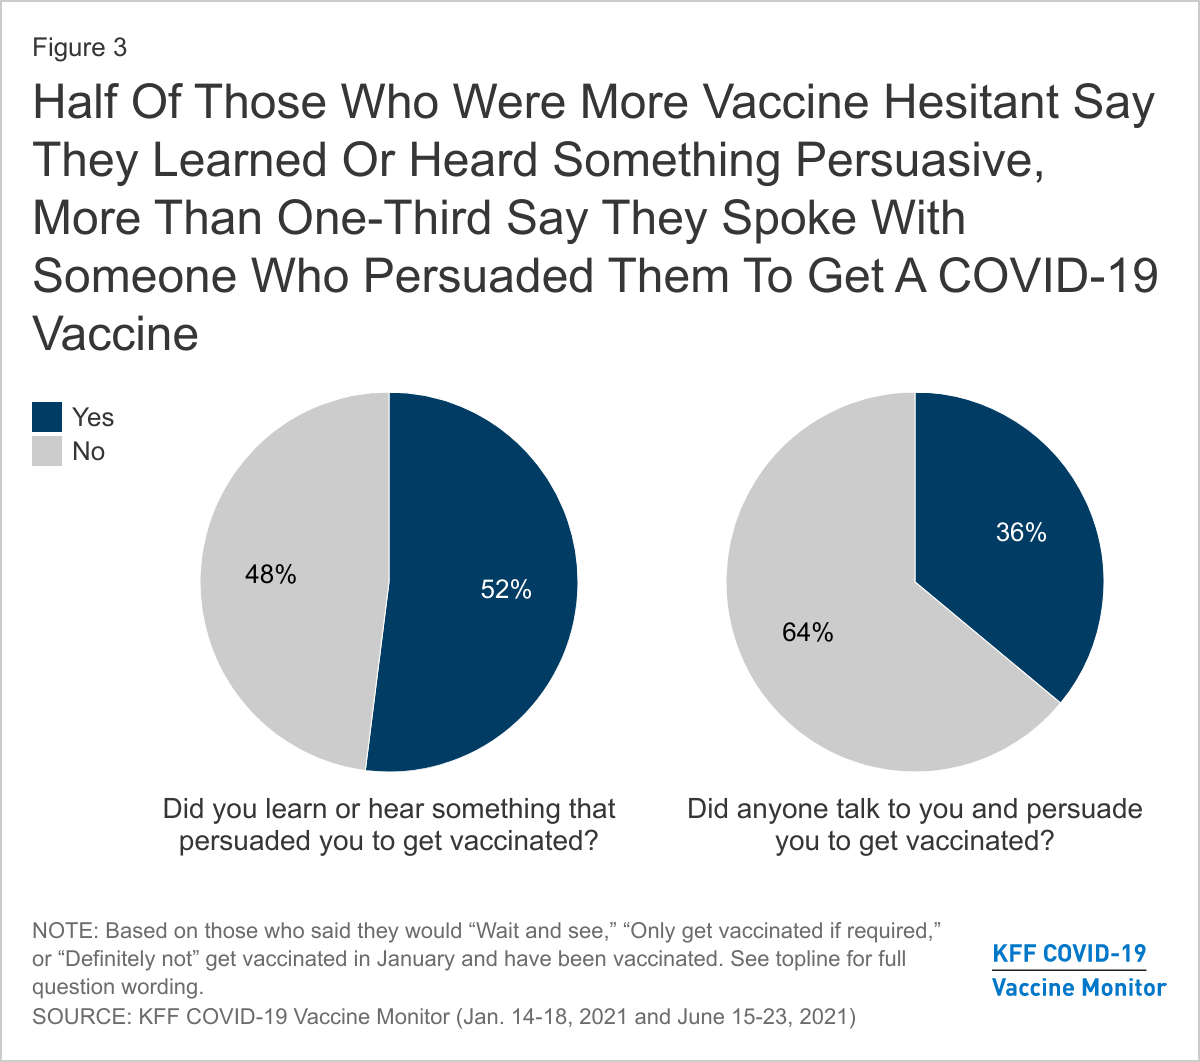 Access to information and personal conversations impacts vaccination rates.